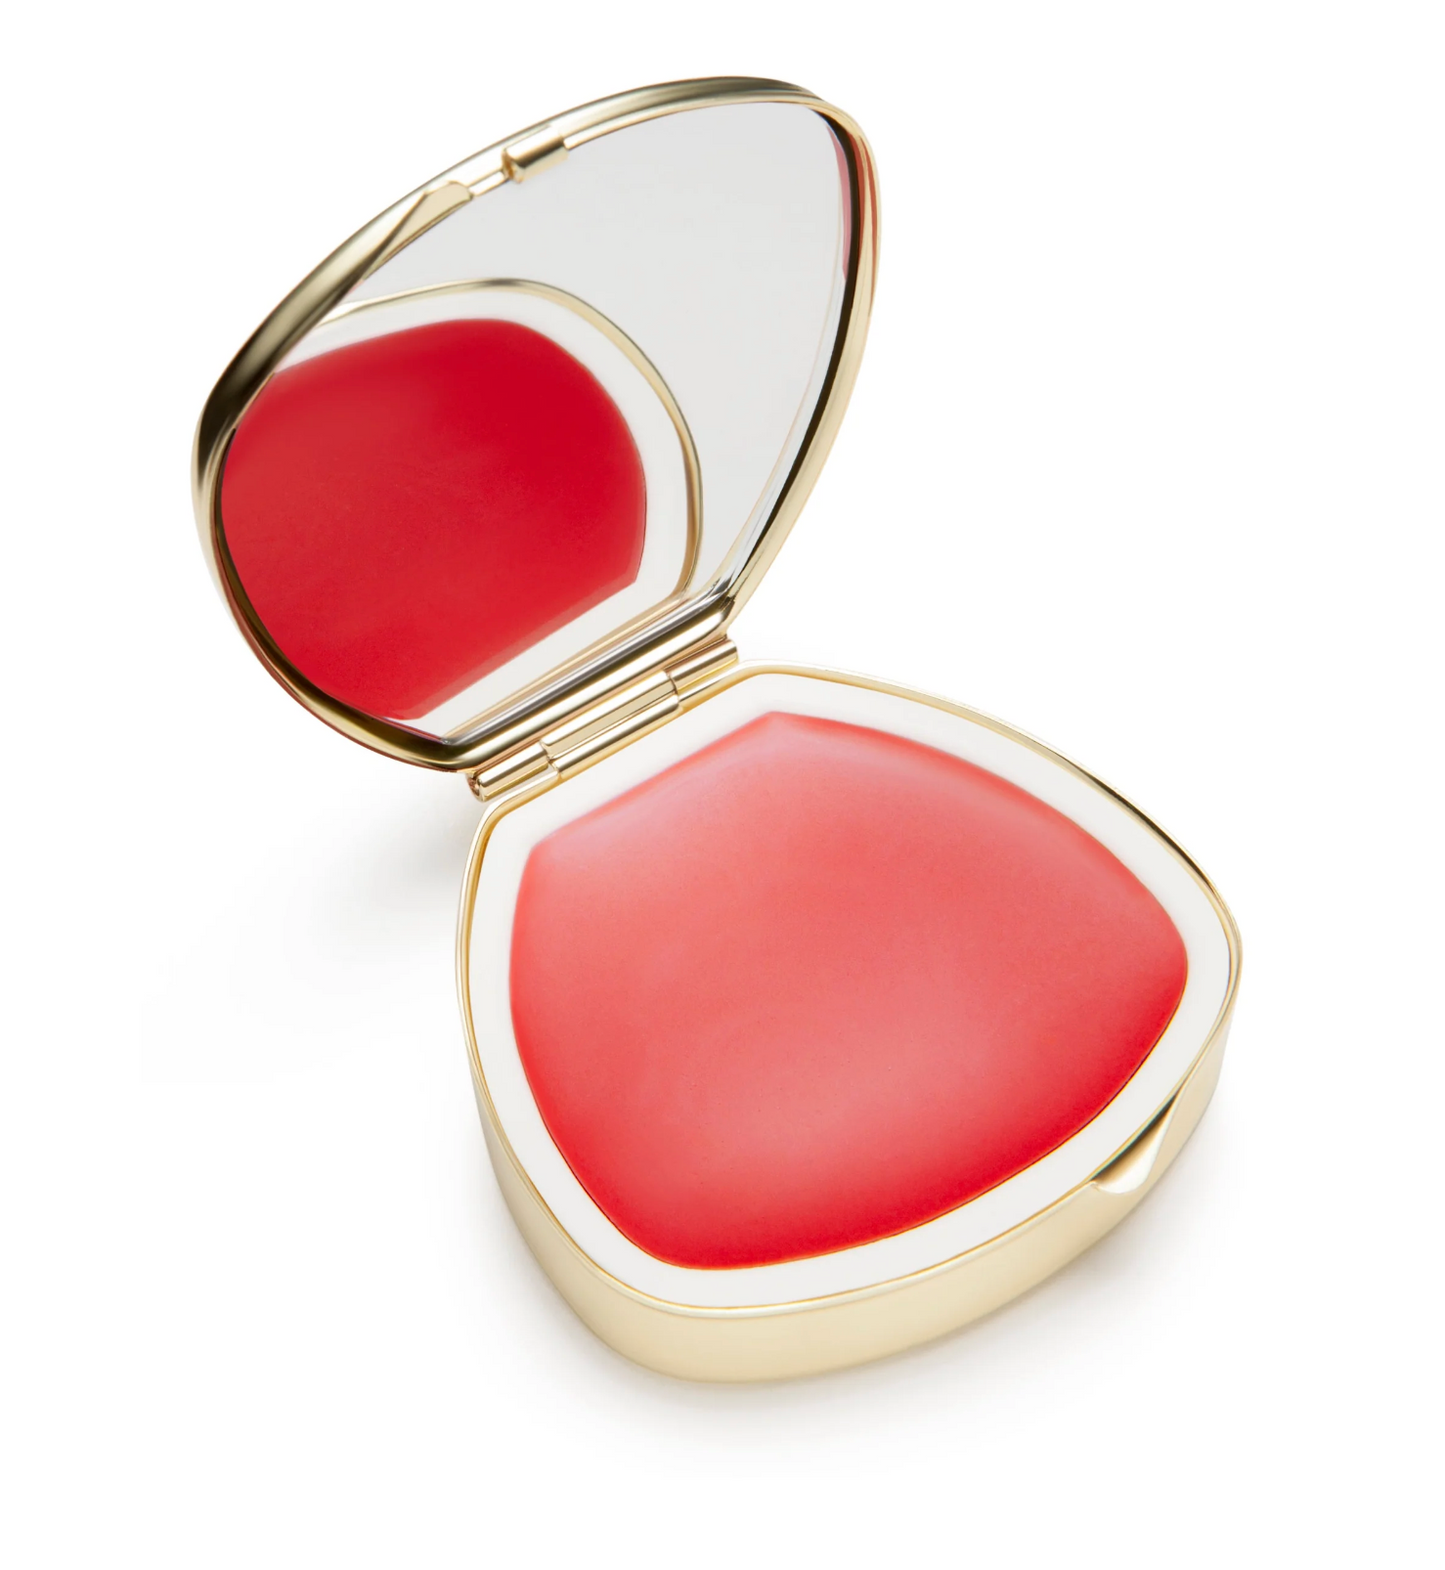 The Cats' Whiskers - Lip Balm Compact